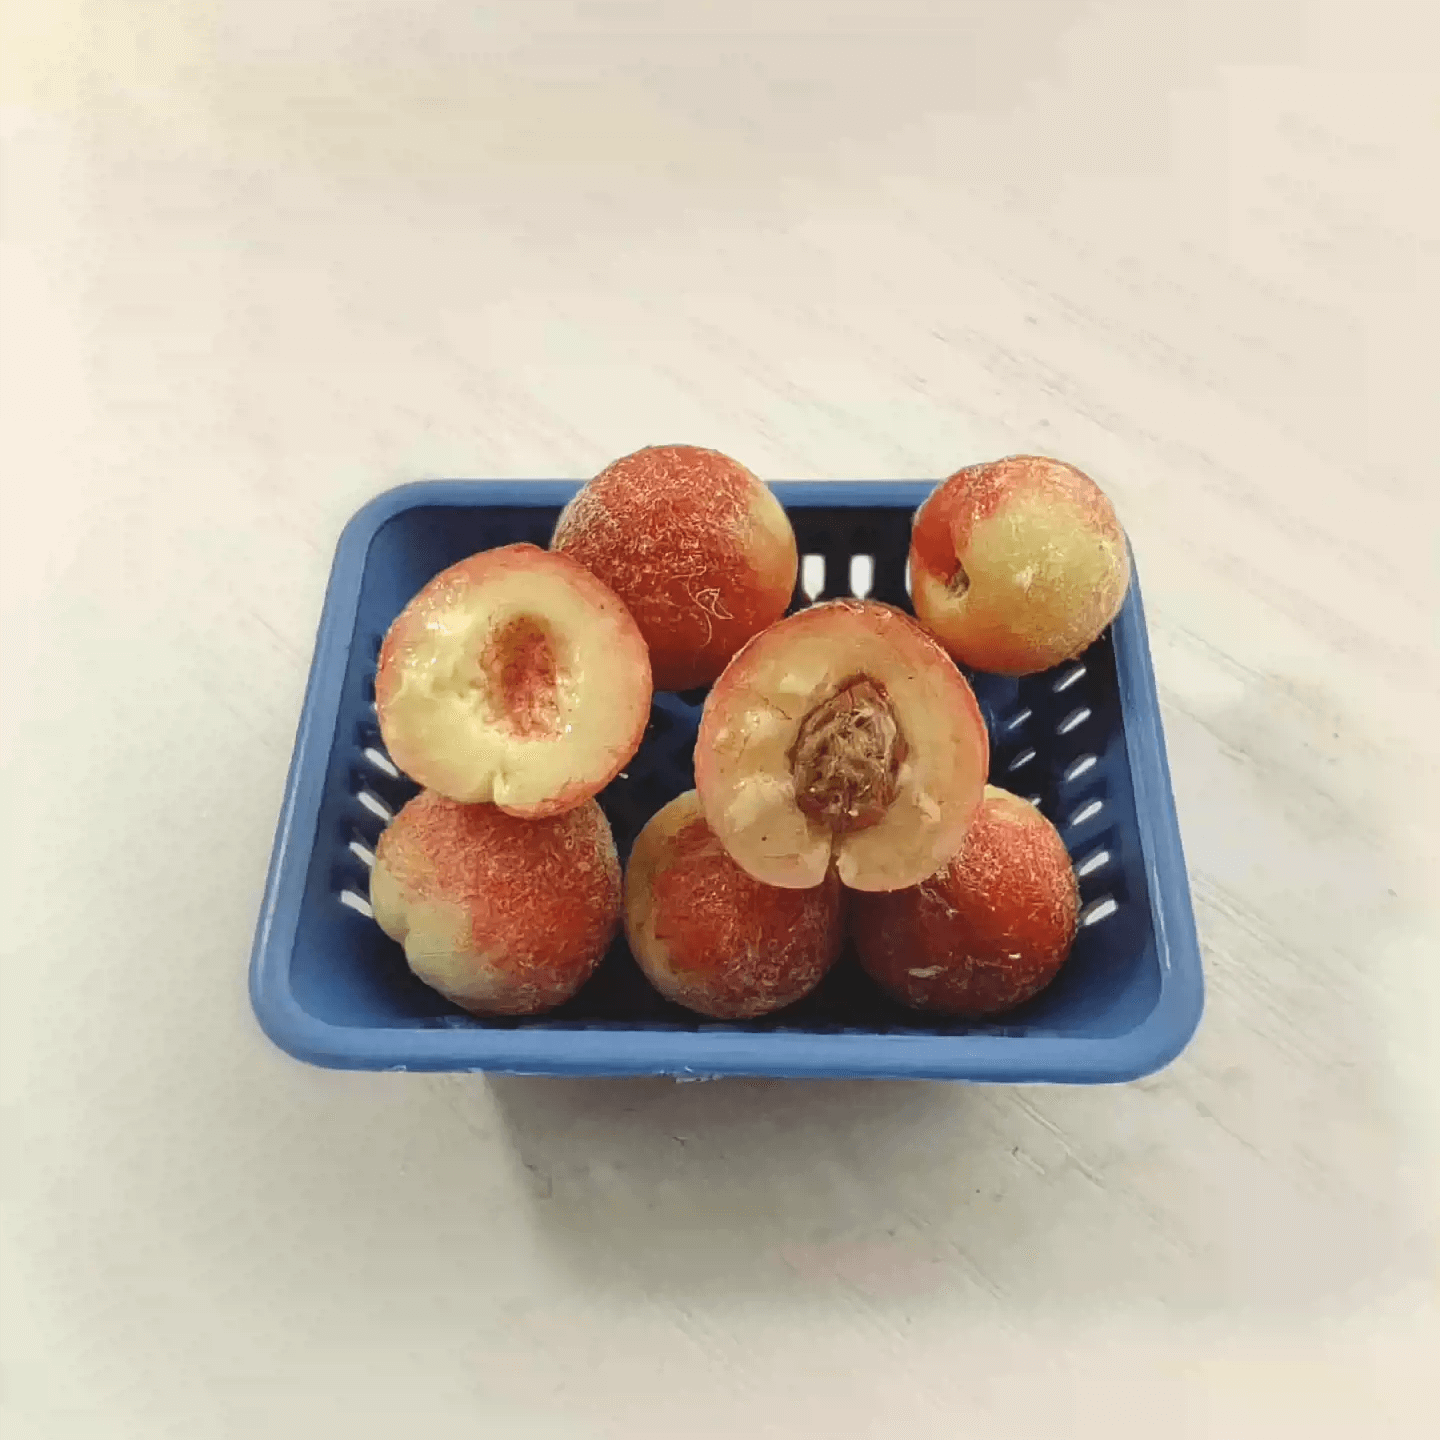 Realistic Wild Peach 1:6 and 1:12 scale. Miniature fruit 1/6 scale. Miniature fruit 1/12 scale. Dollhouse kitchen accessories. Miniature food for doll. Miniature fruit for miniature garden, dollhouse farmhouse, tiny kitchen. Size: Whole Wild Peach; Half Wild Peach.